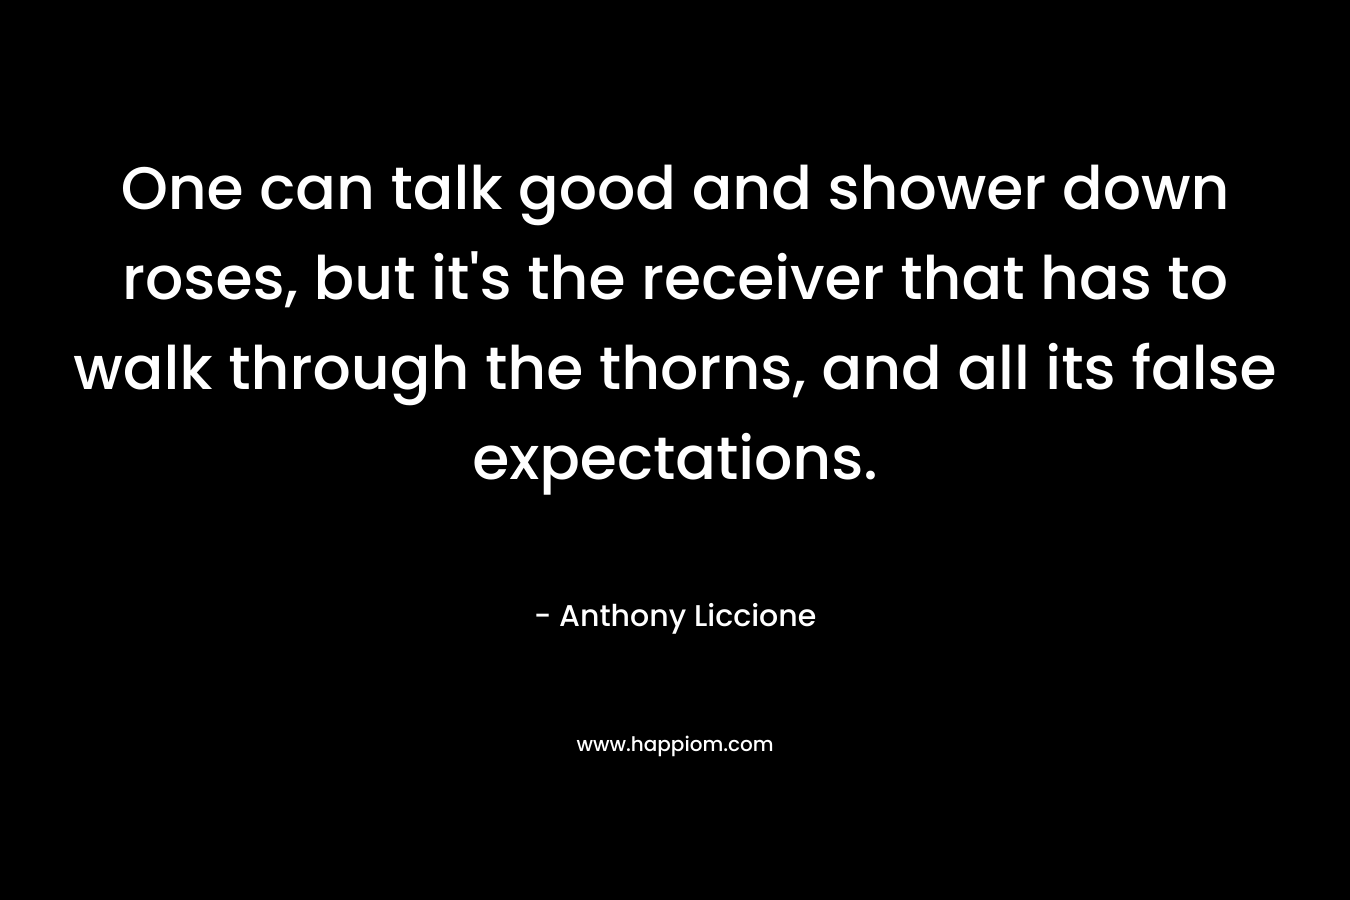 One can talk good and shower down roses, but it’s the receiver that has to walk through the thorns, and all its false expectations. – Anthony Liccione